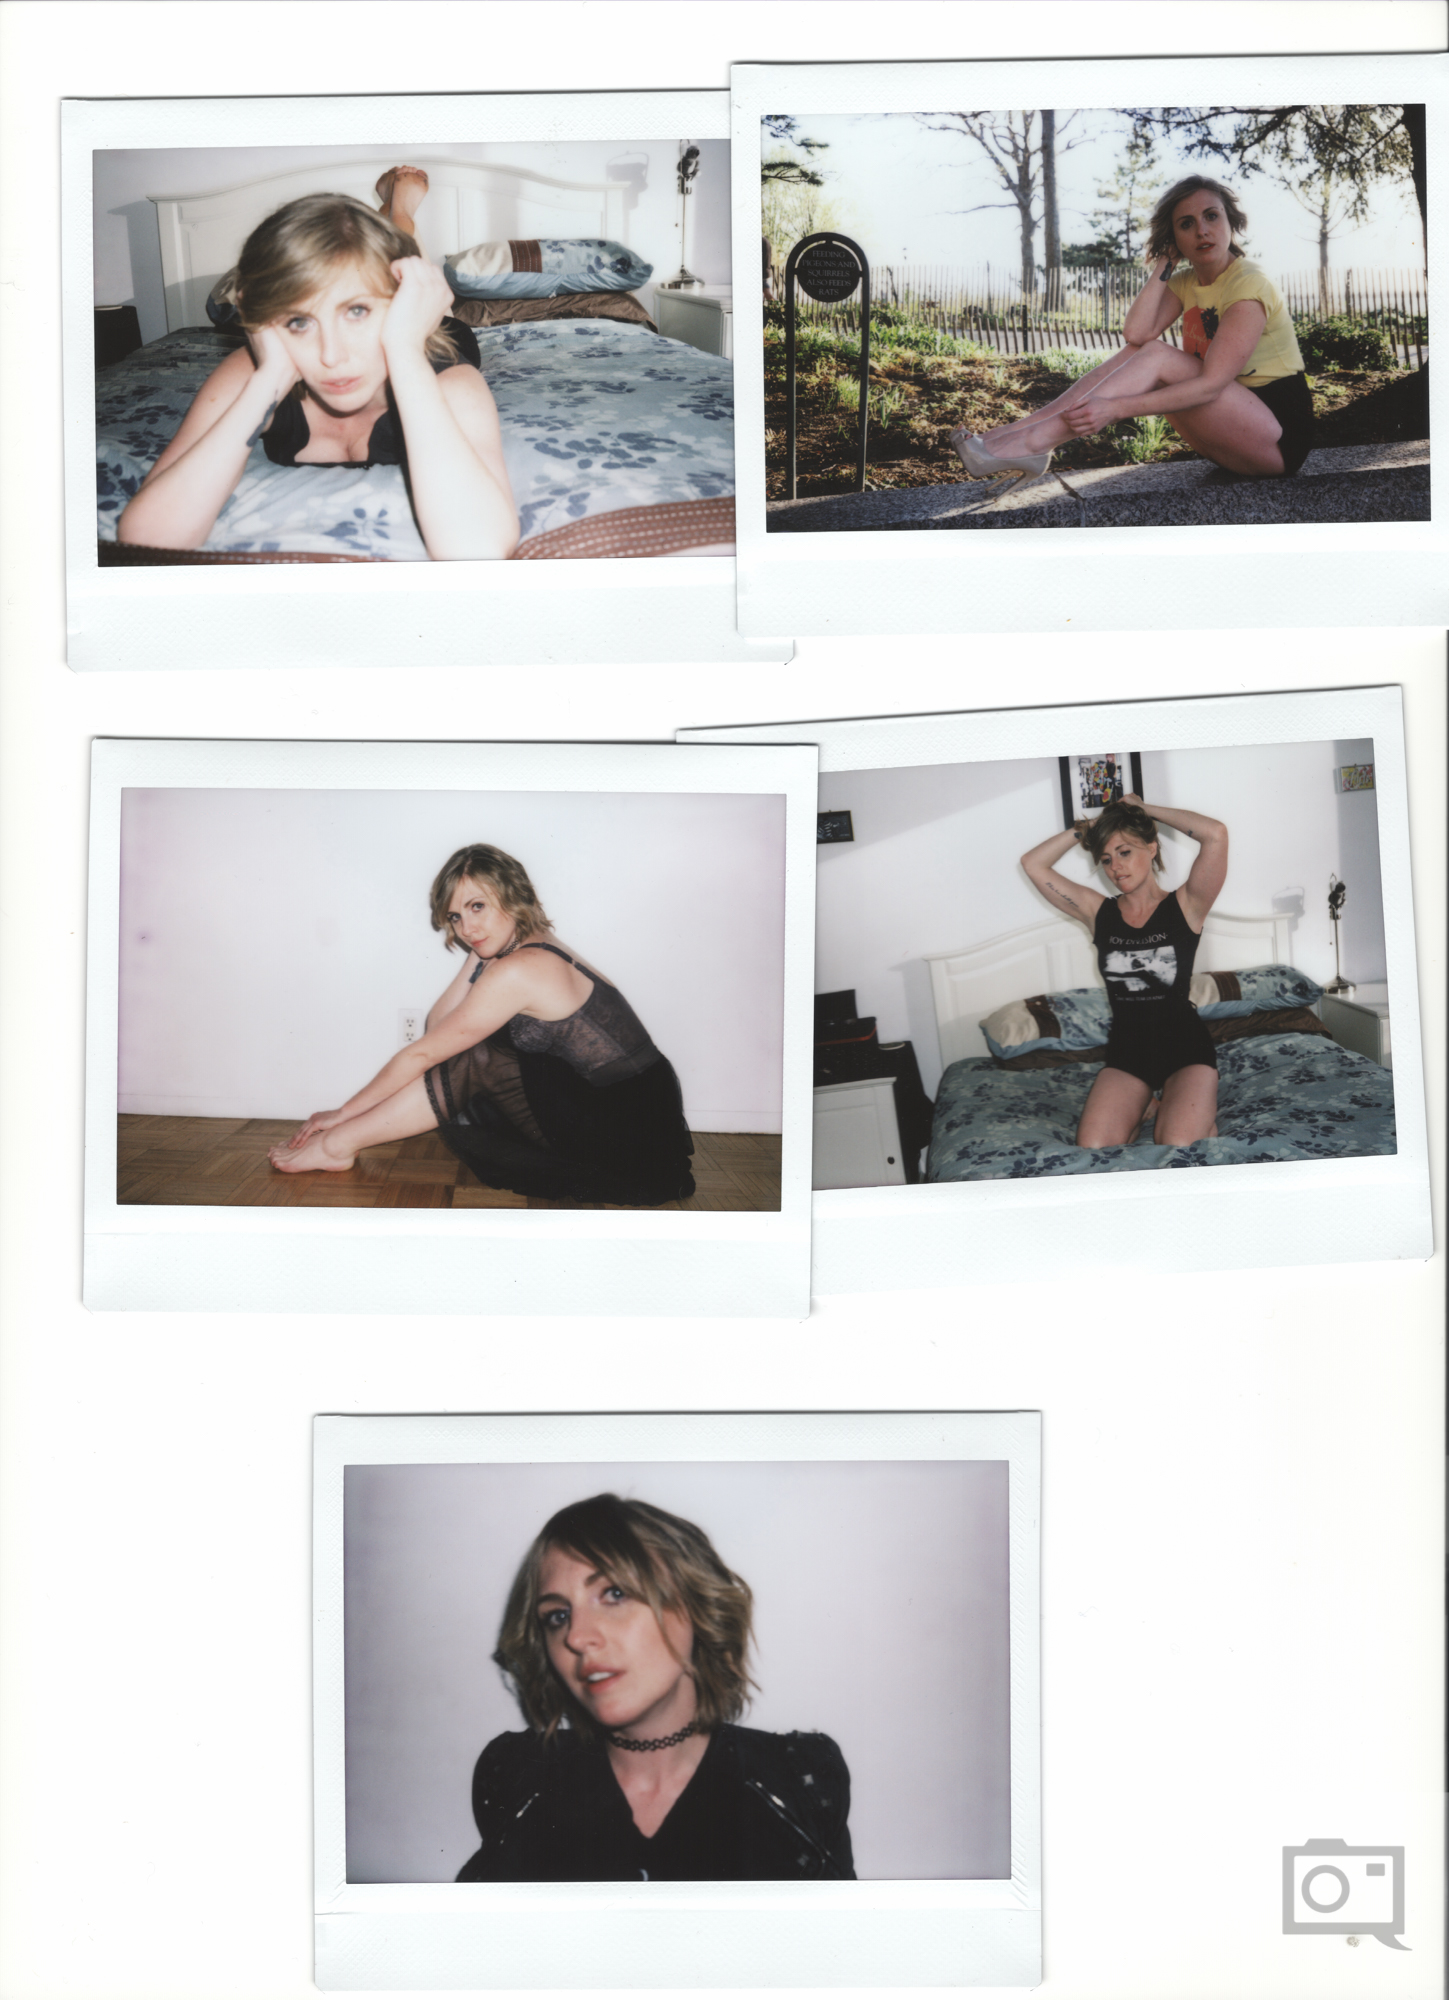 A 800 word review of the Fujifilm Instax Wide 300: Better than